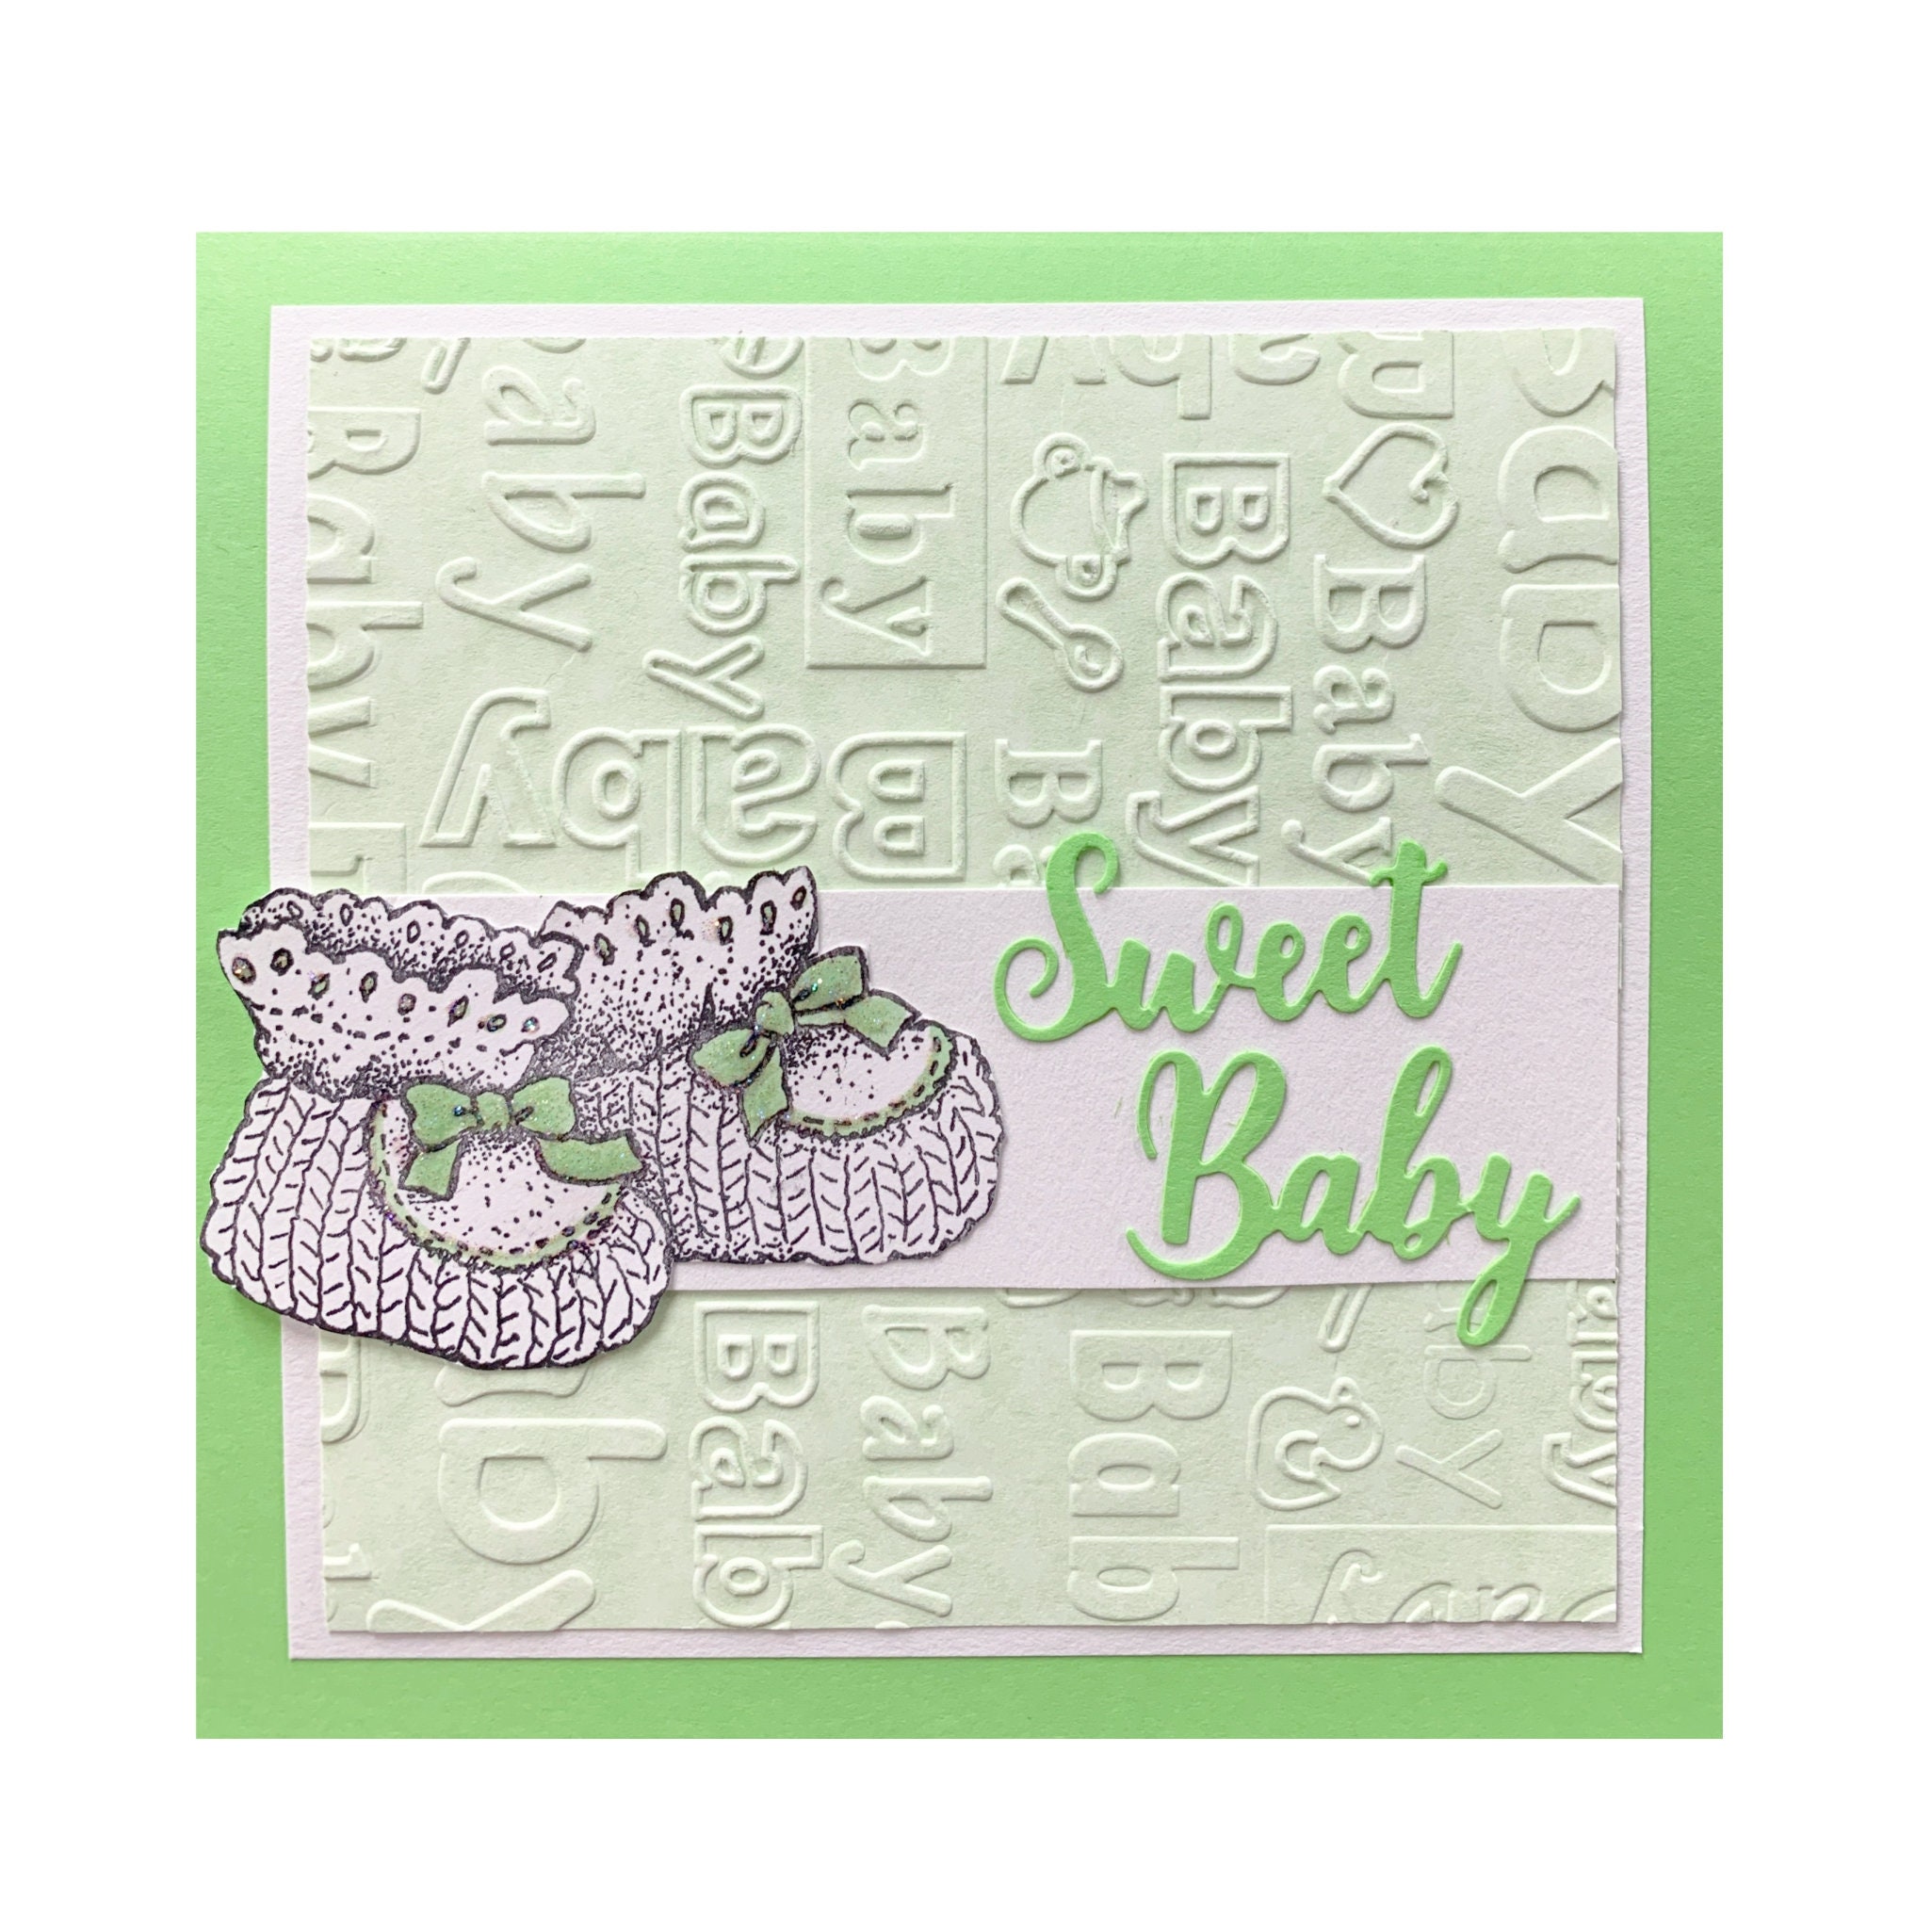 Baby Booties Lg Rubber Stamp Knit Impression Obsession Serendipity Cling Stamps 